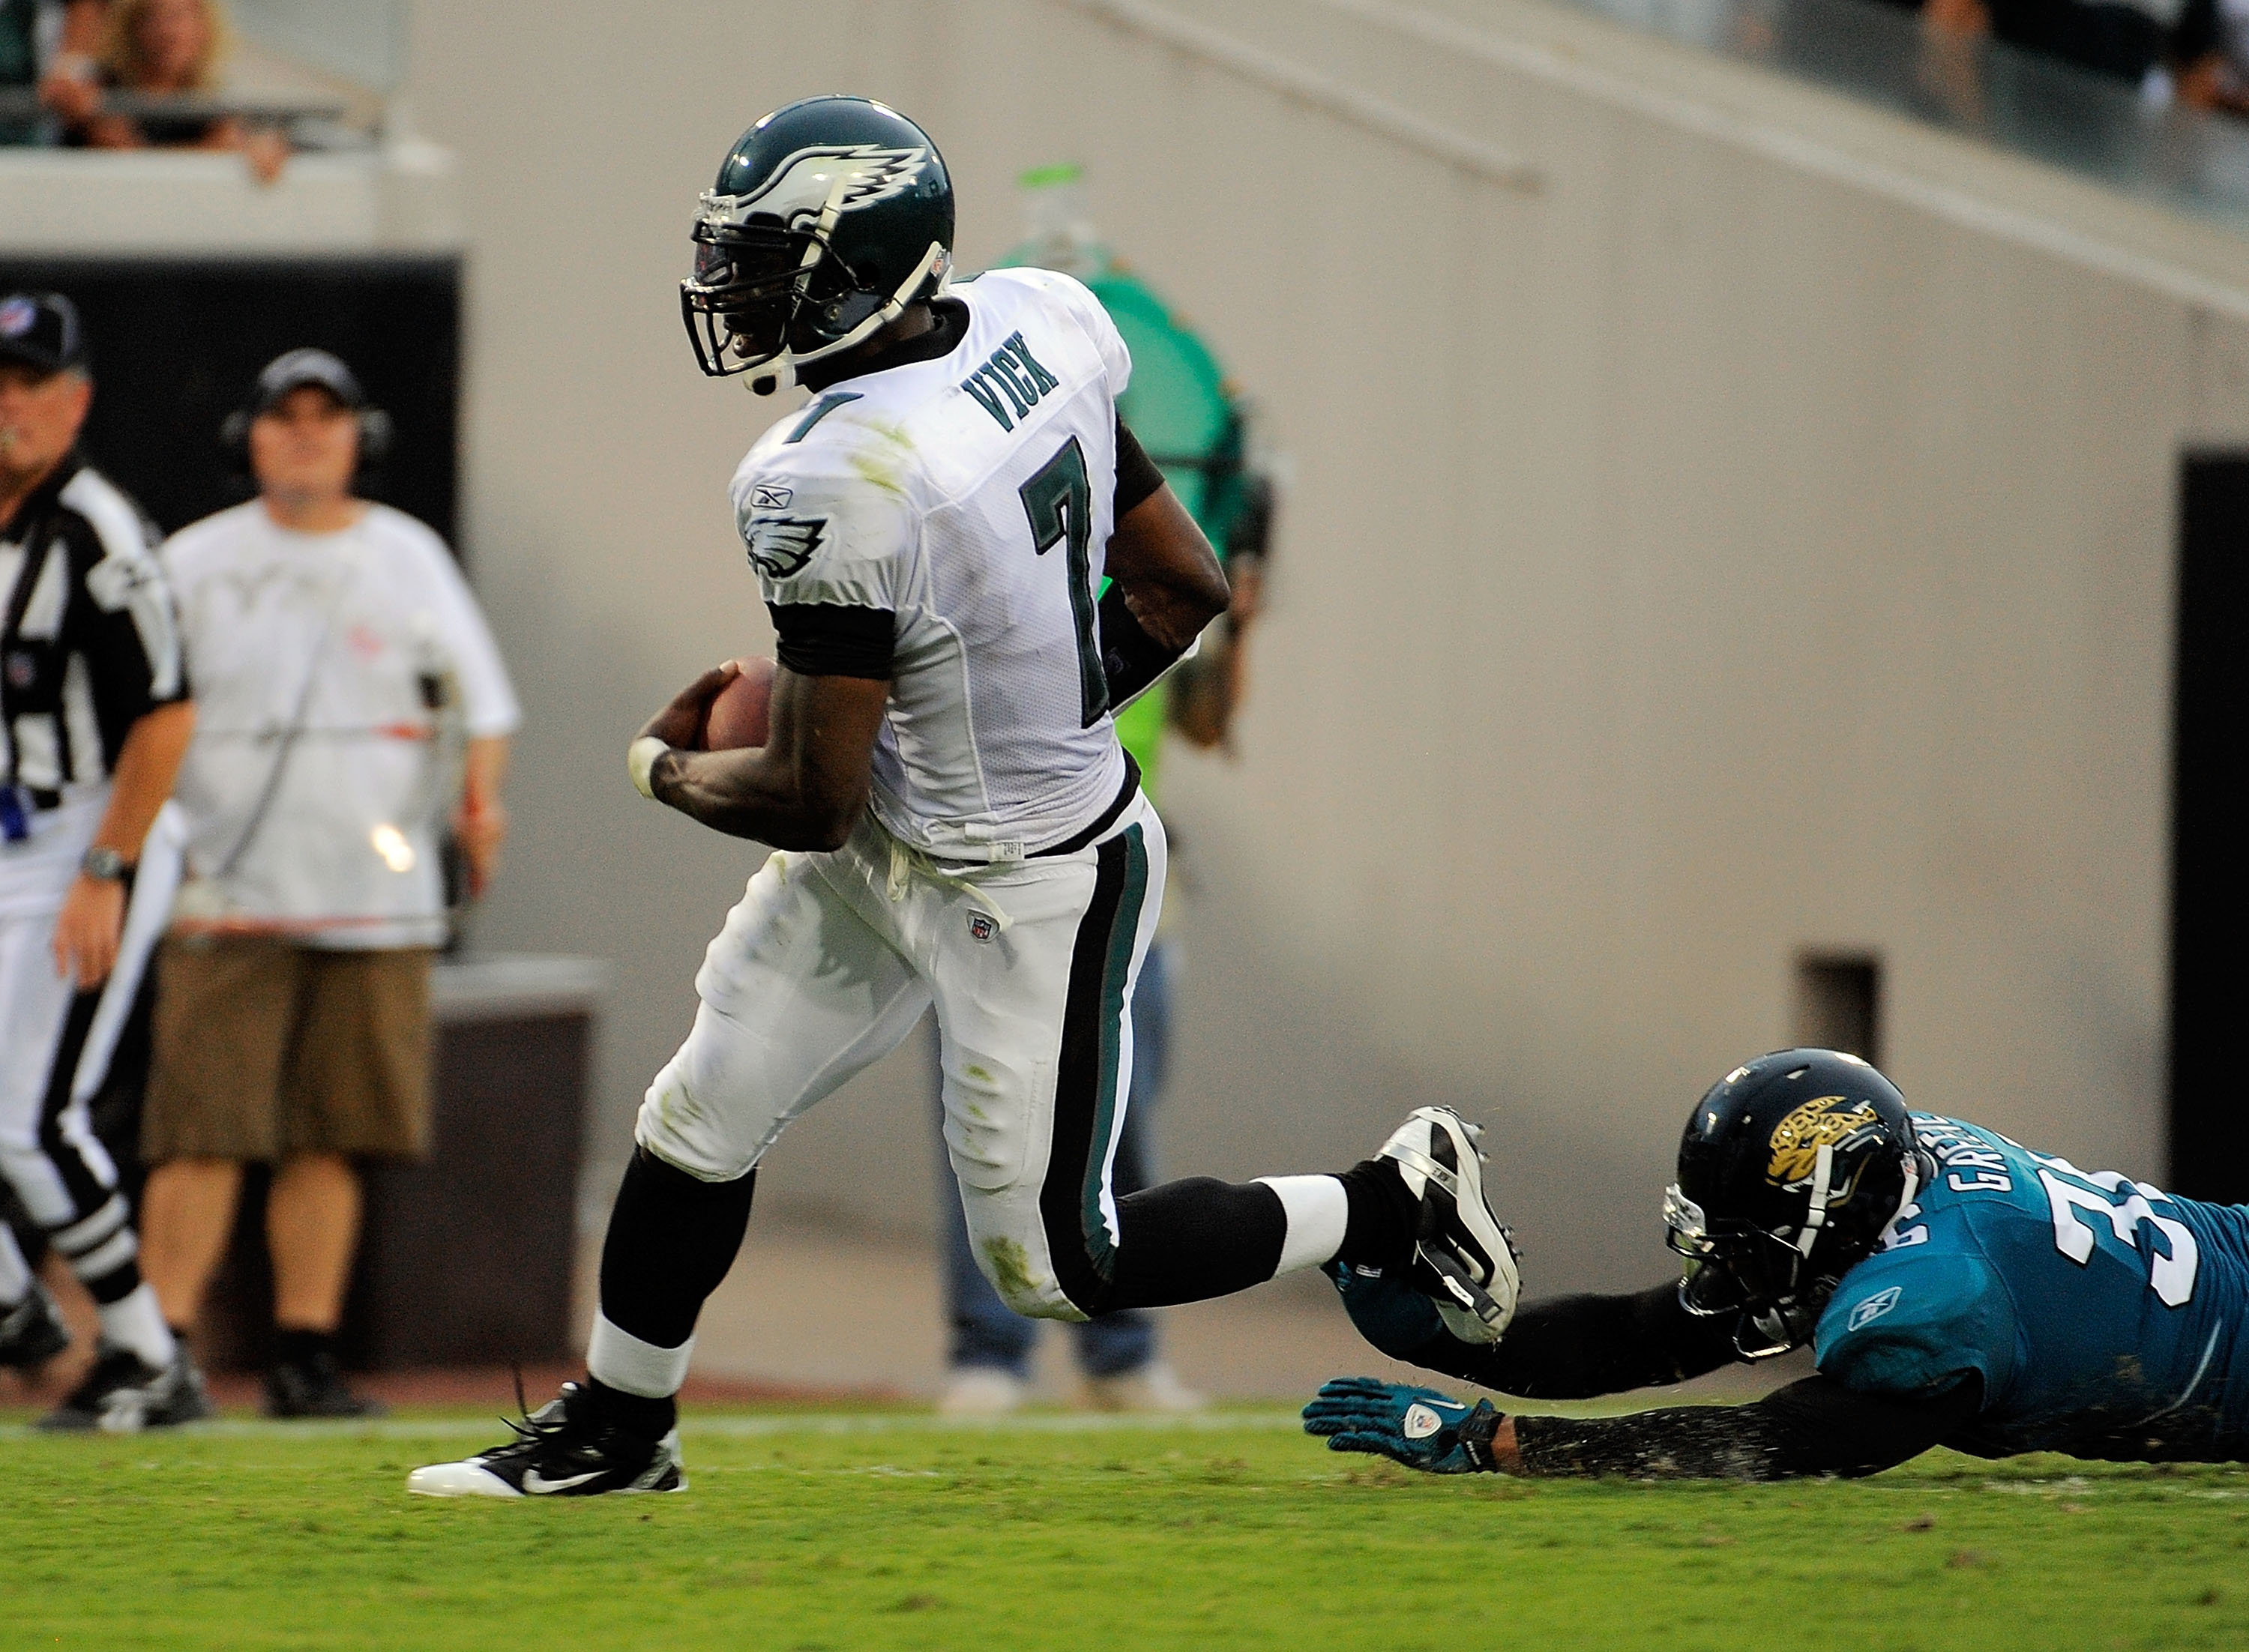 Tuesday NFL Game: Can Michael Vick Boost His MVP Stock Against the